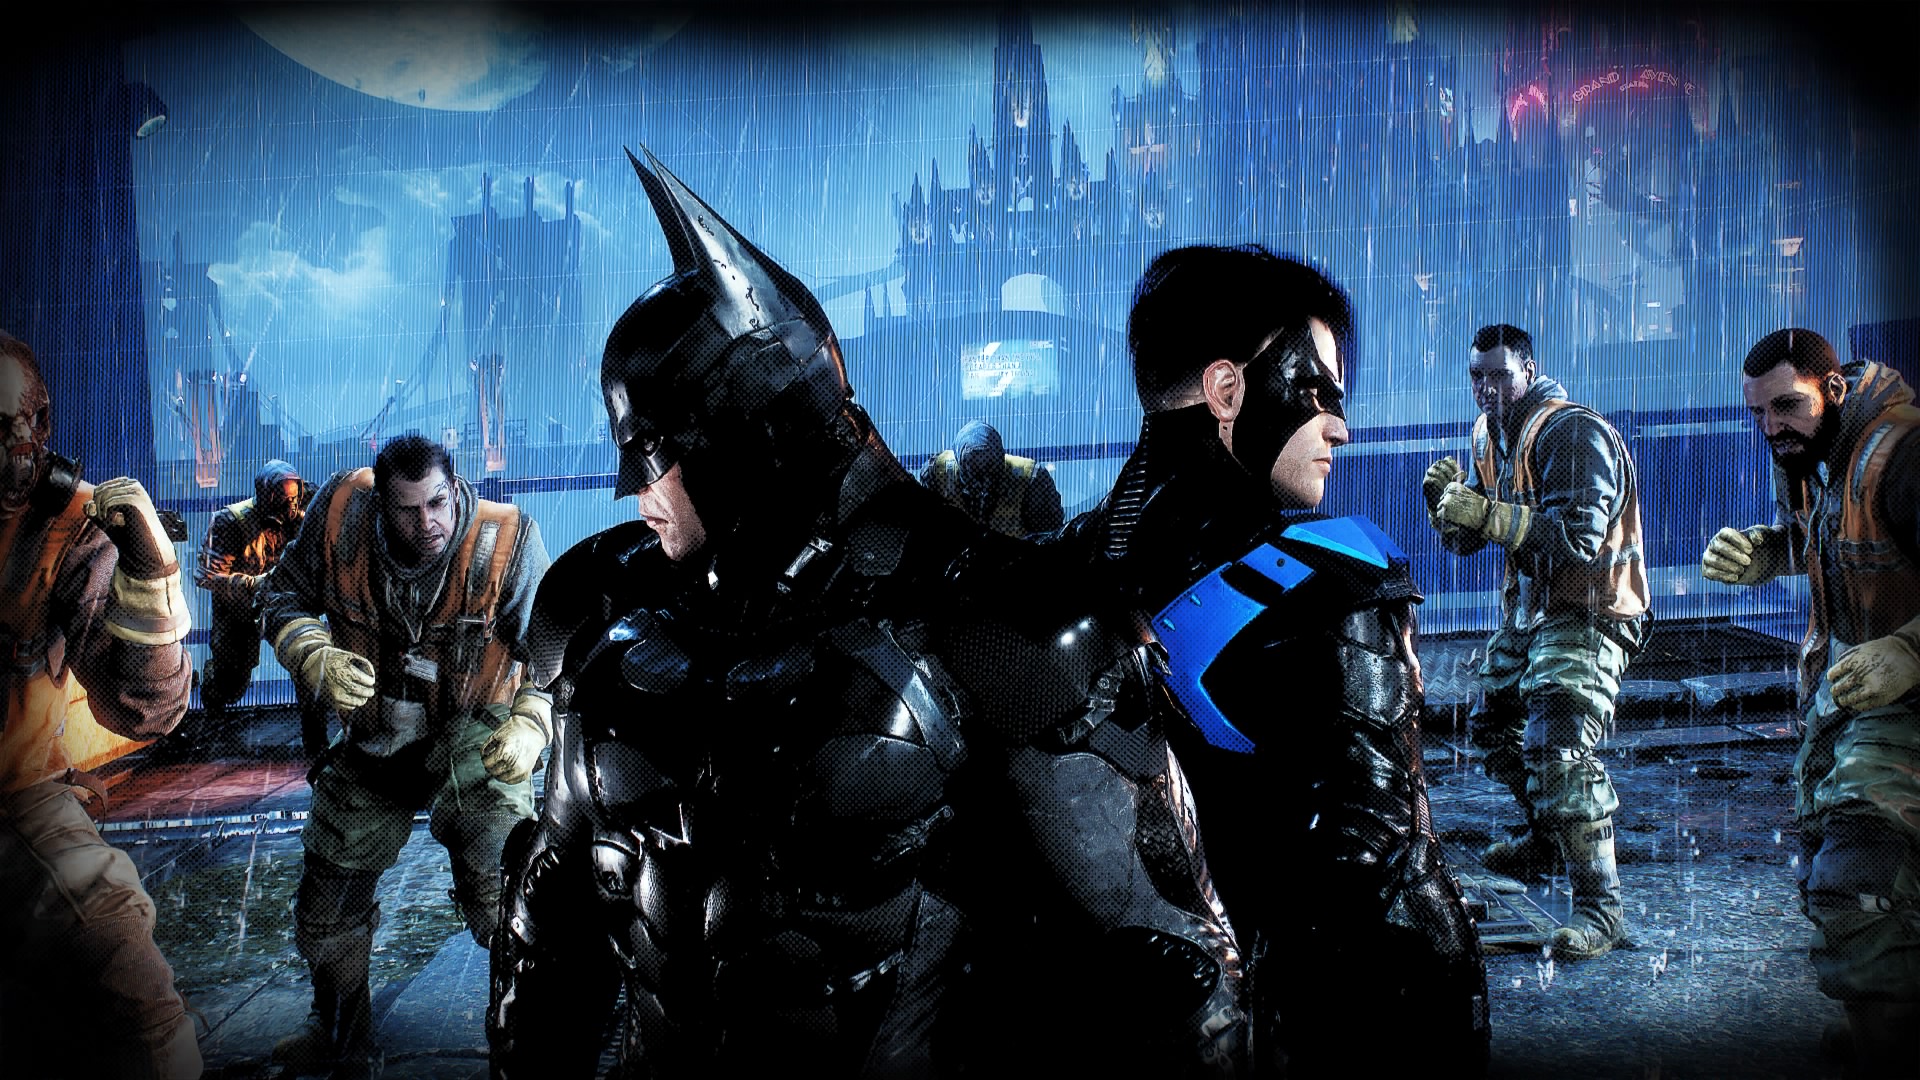 Is Gotham Knights related to the Arkham games? - Polygon